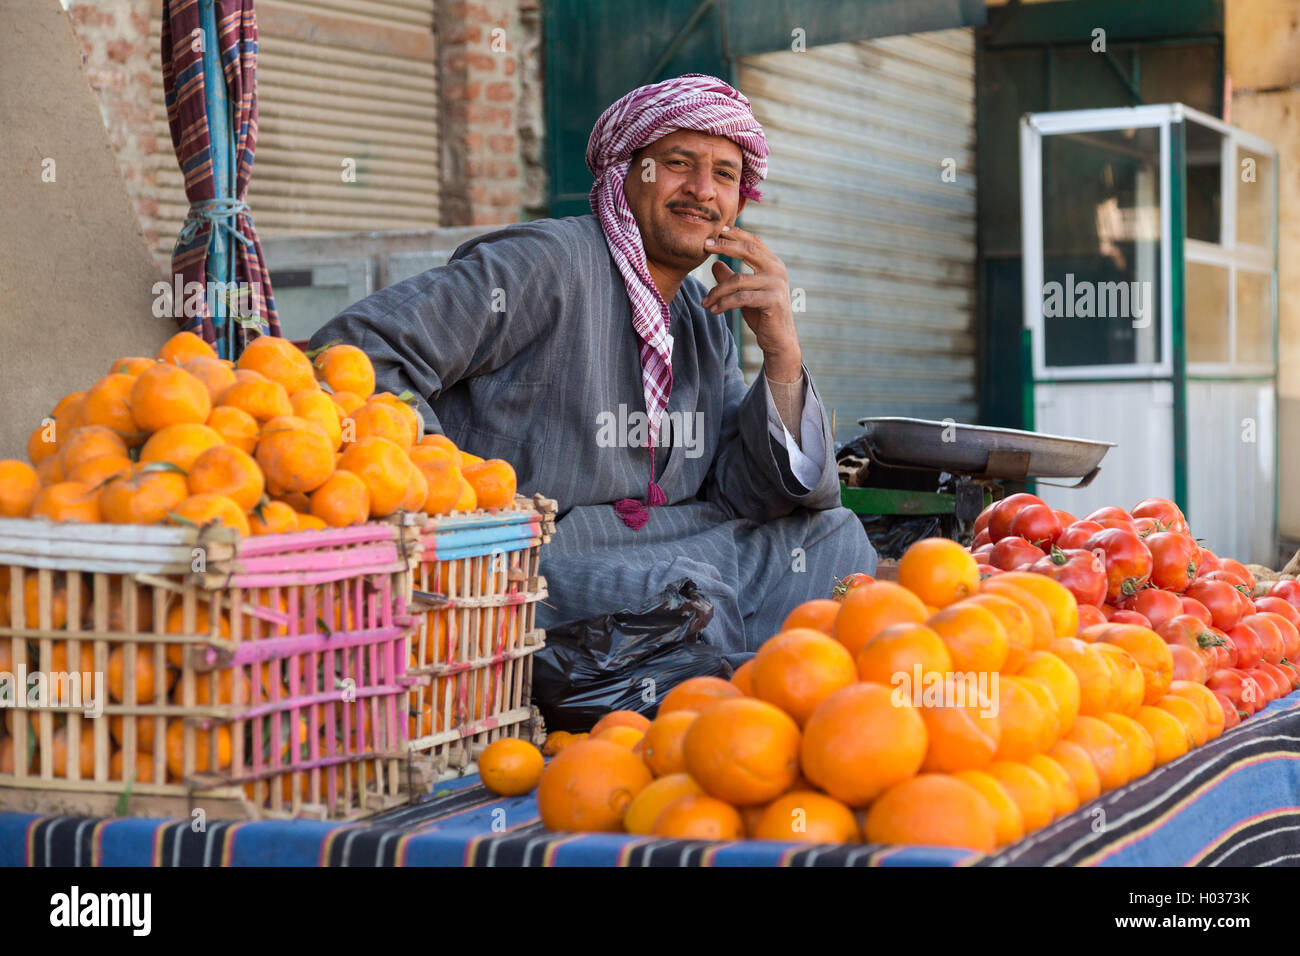 DARAW, EGYPT - FEBRUARY 6, 2016: Local food vendor at Daraw market selling oranges and tomatoes. Stock Photo